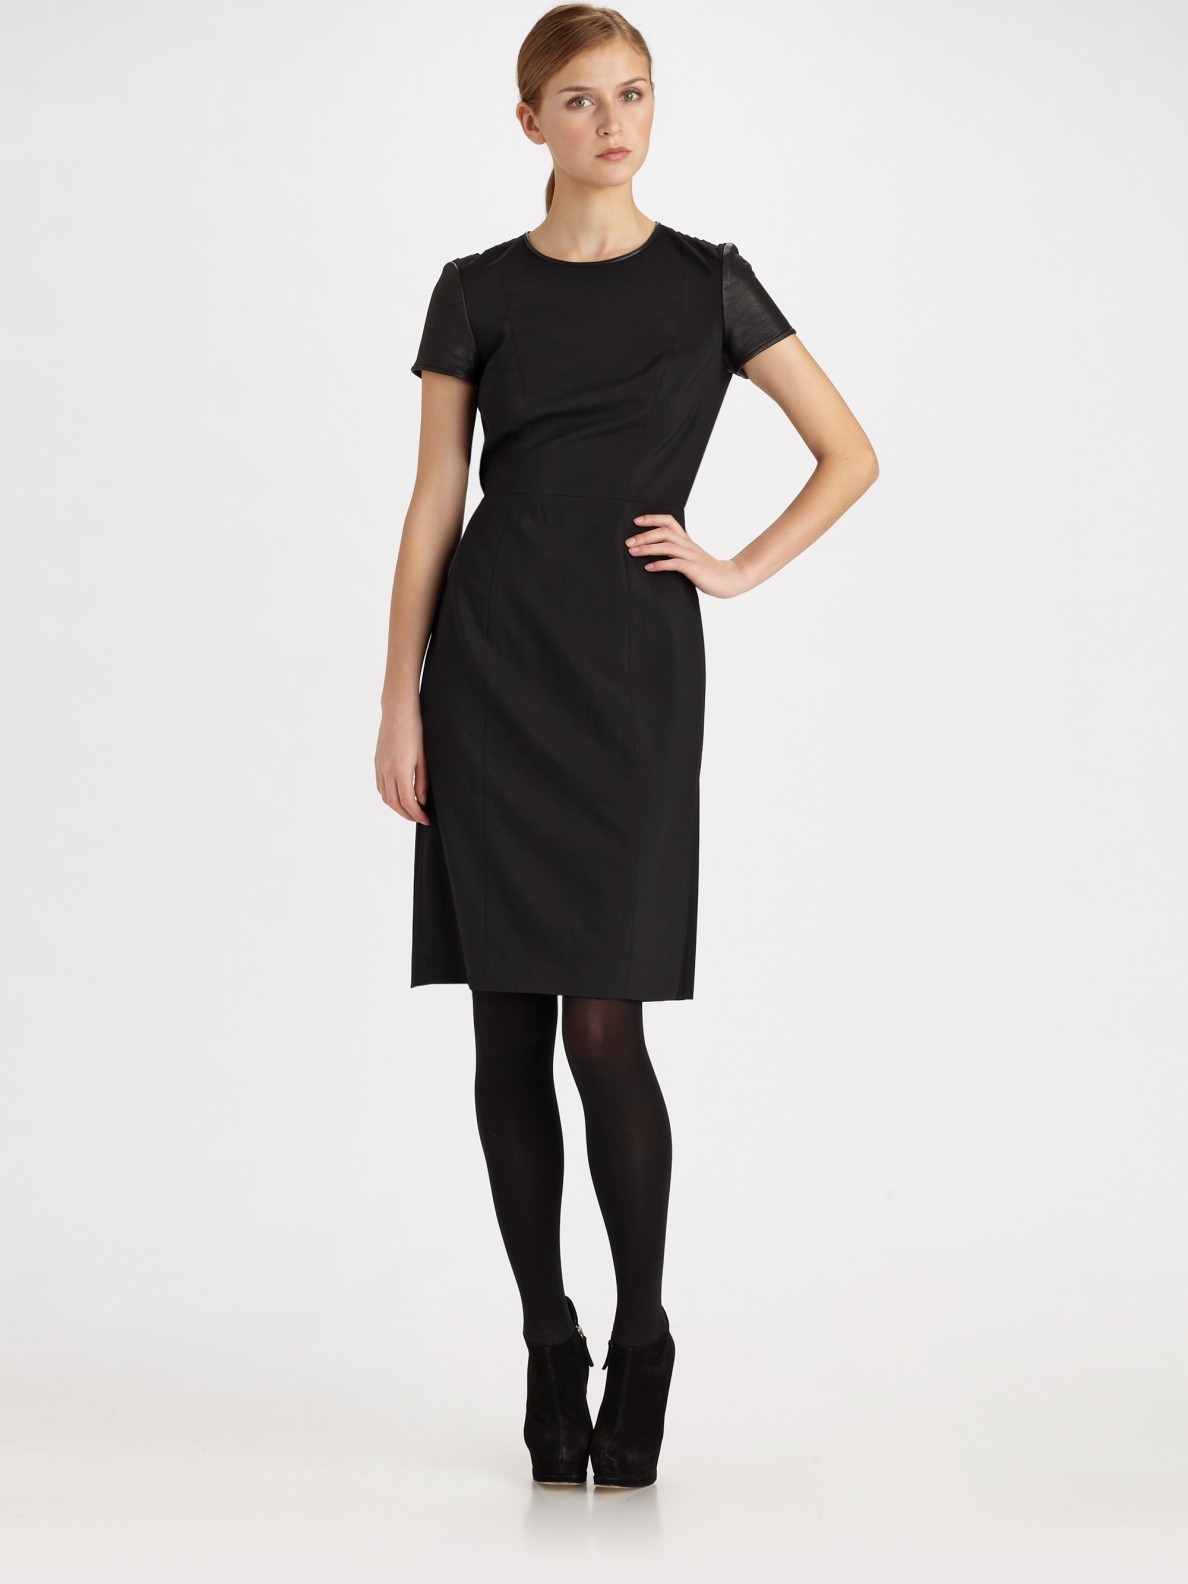 Ports 1961 Leather Trimmed Wool Dress in Black (jet) | Lyst